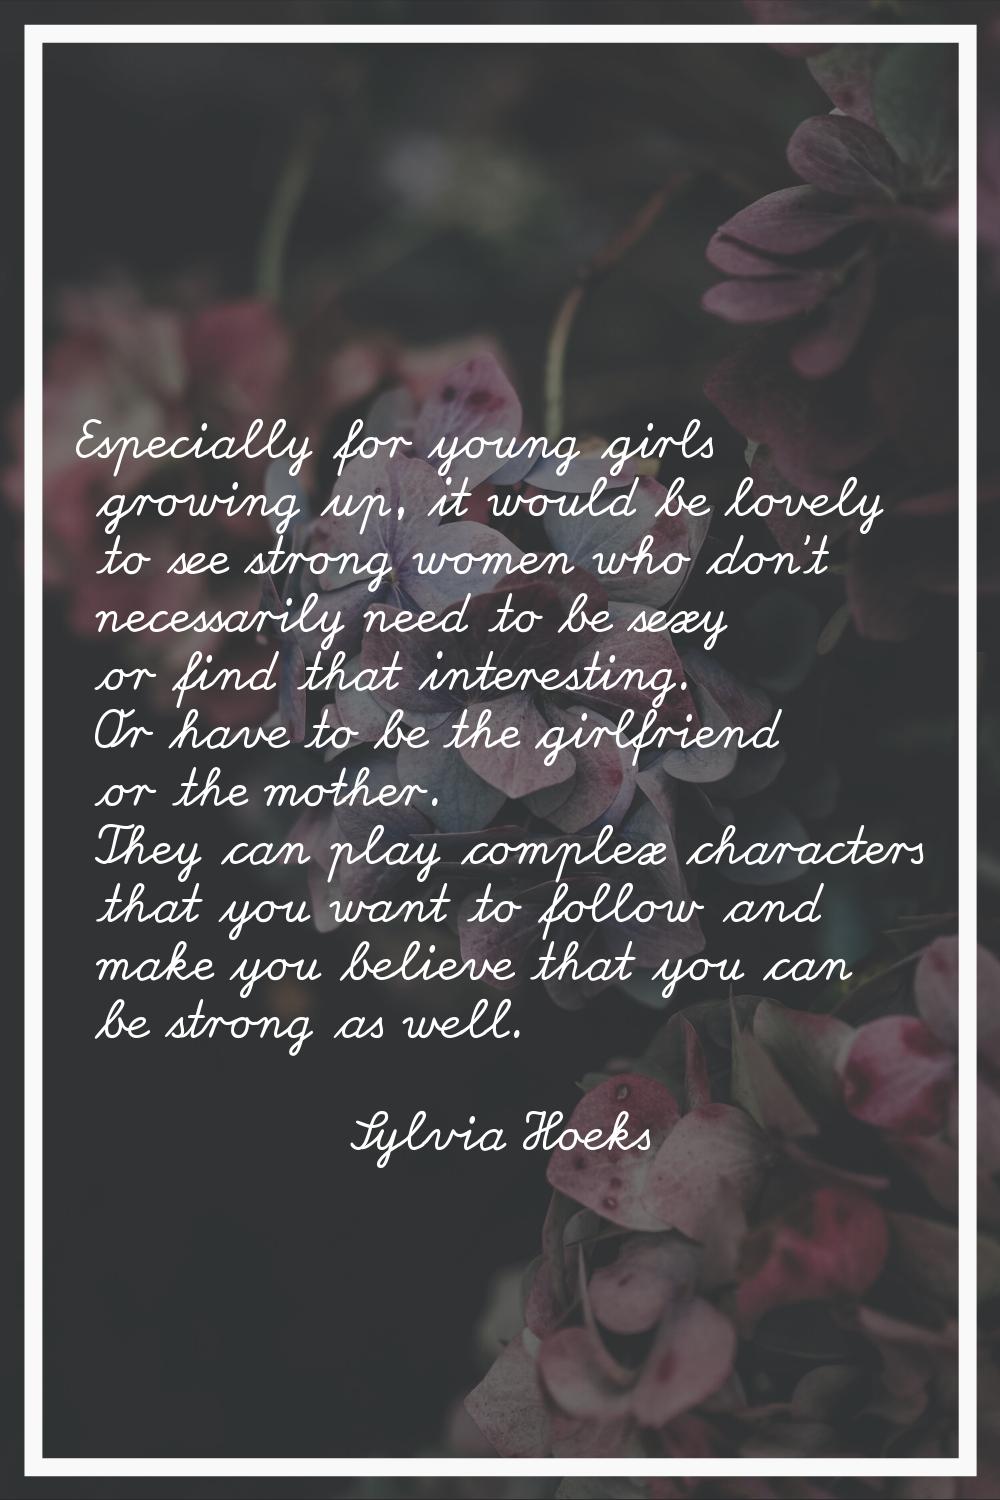 Especially for young girls growing up, it would be lovely to see strong women who don't necessarily